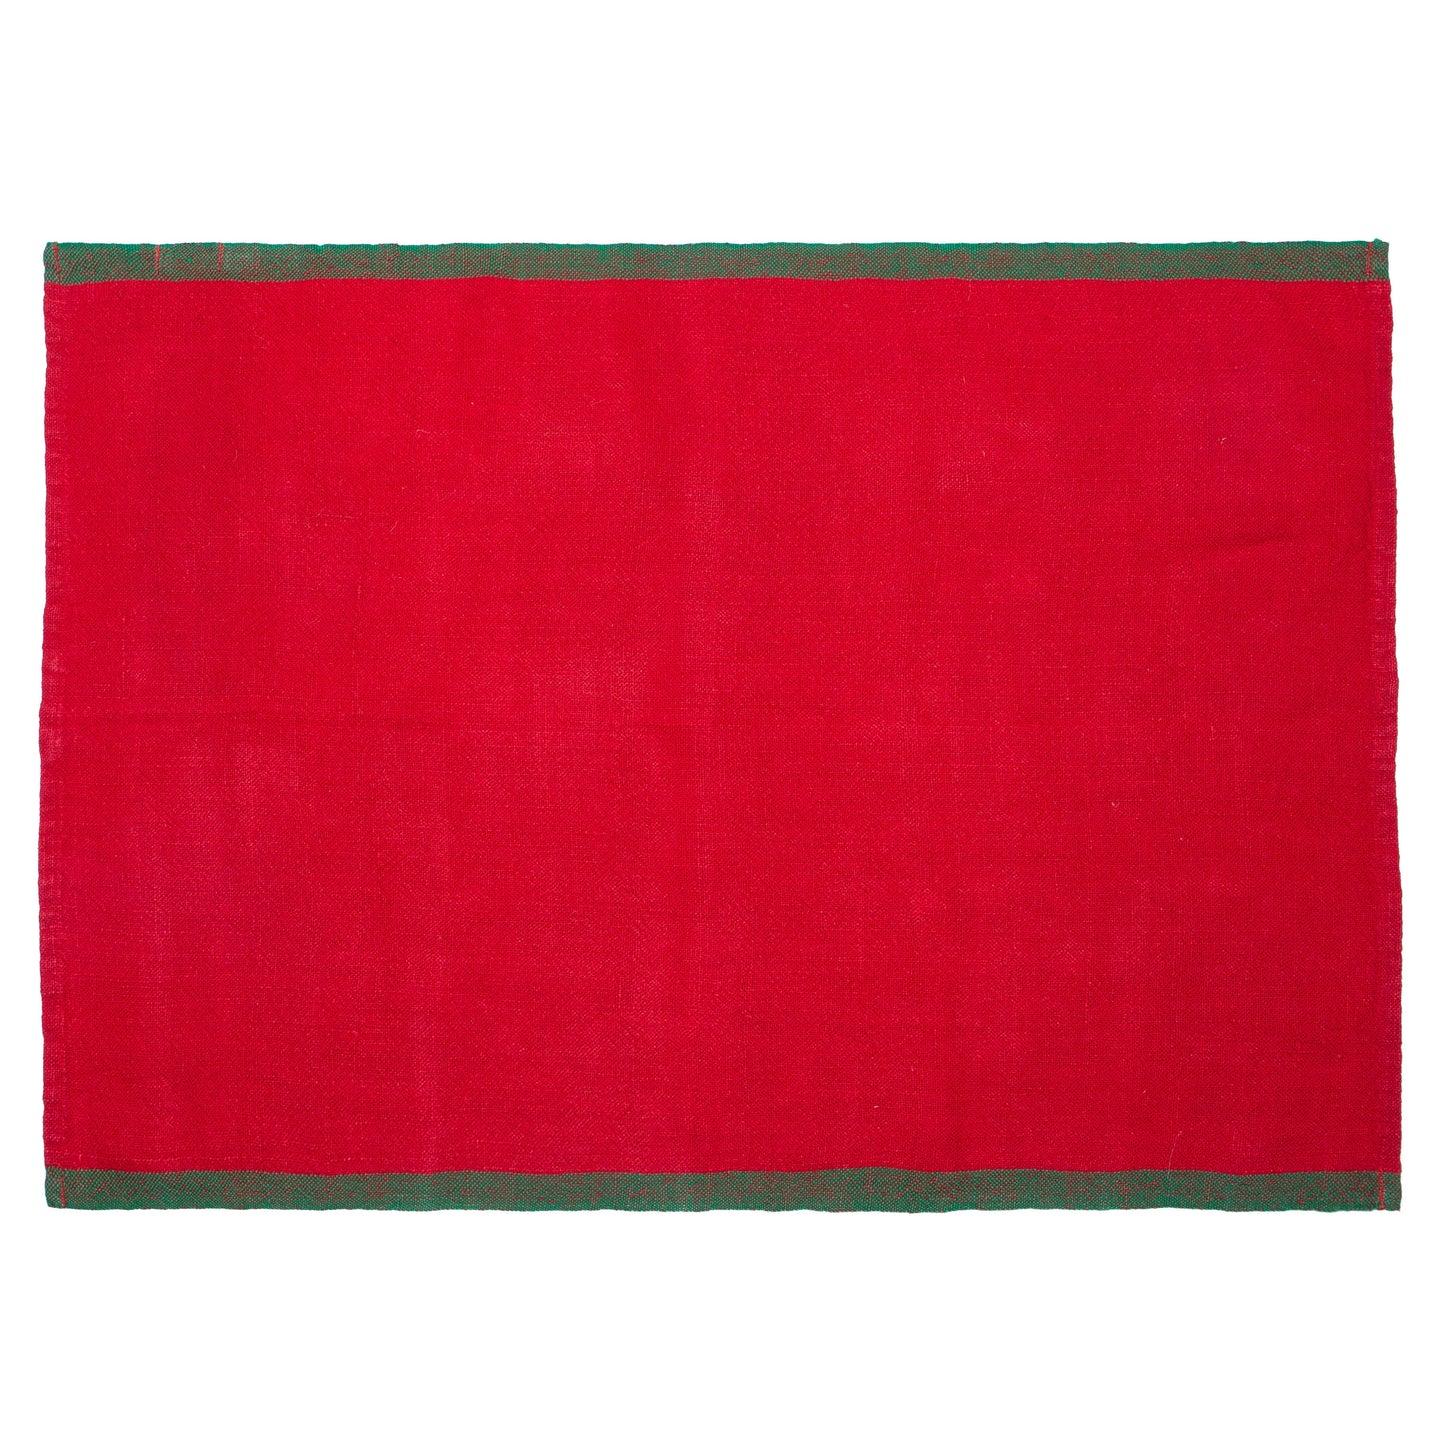 Color Block Red & Green Napkins 20x20 - Set of 4: Red & Green